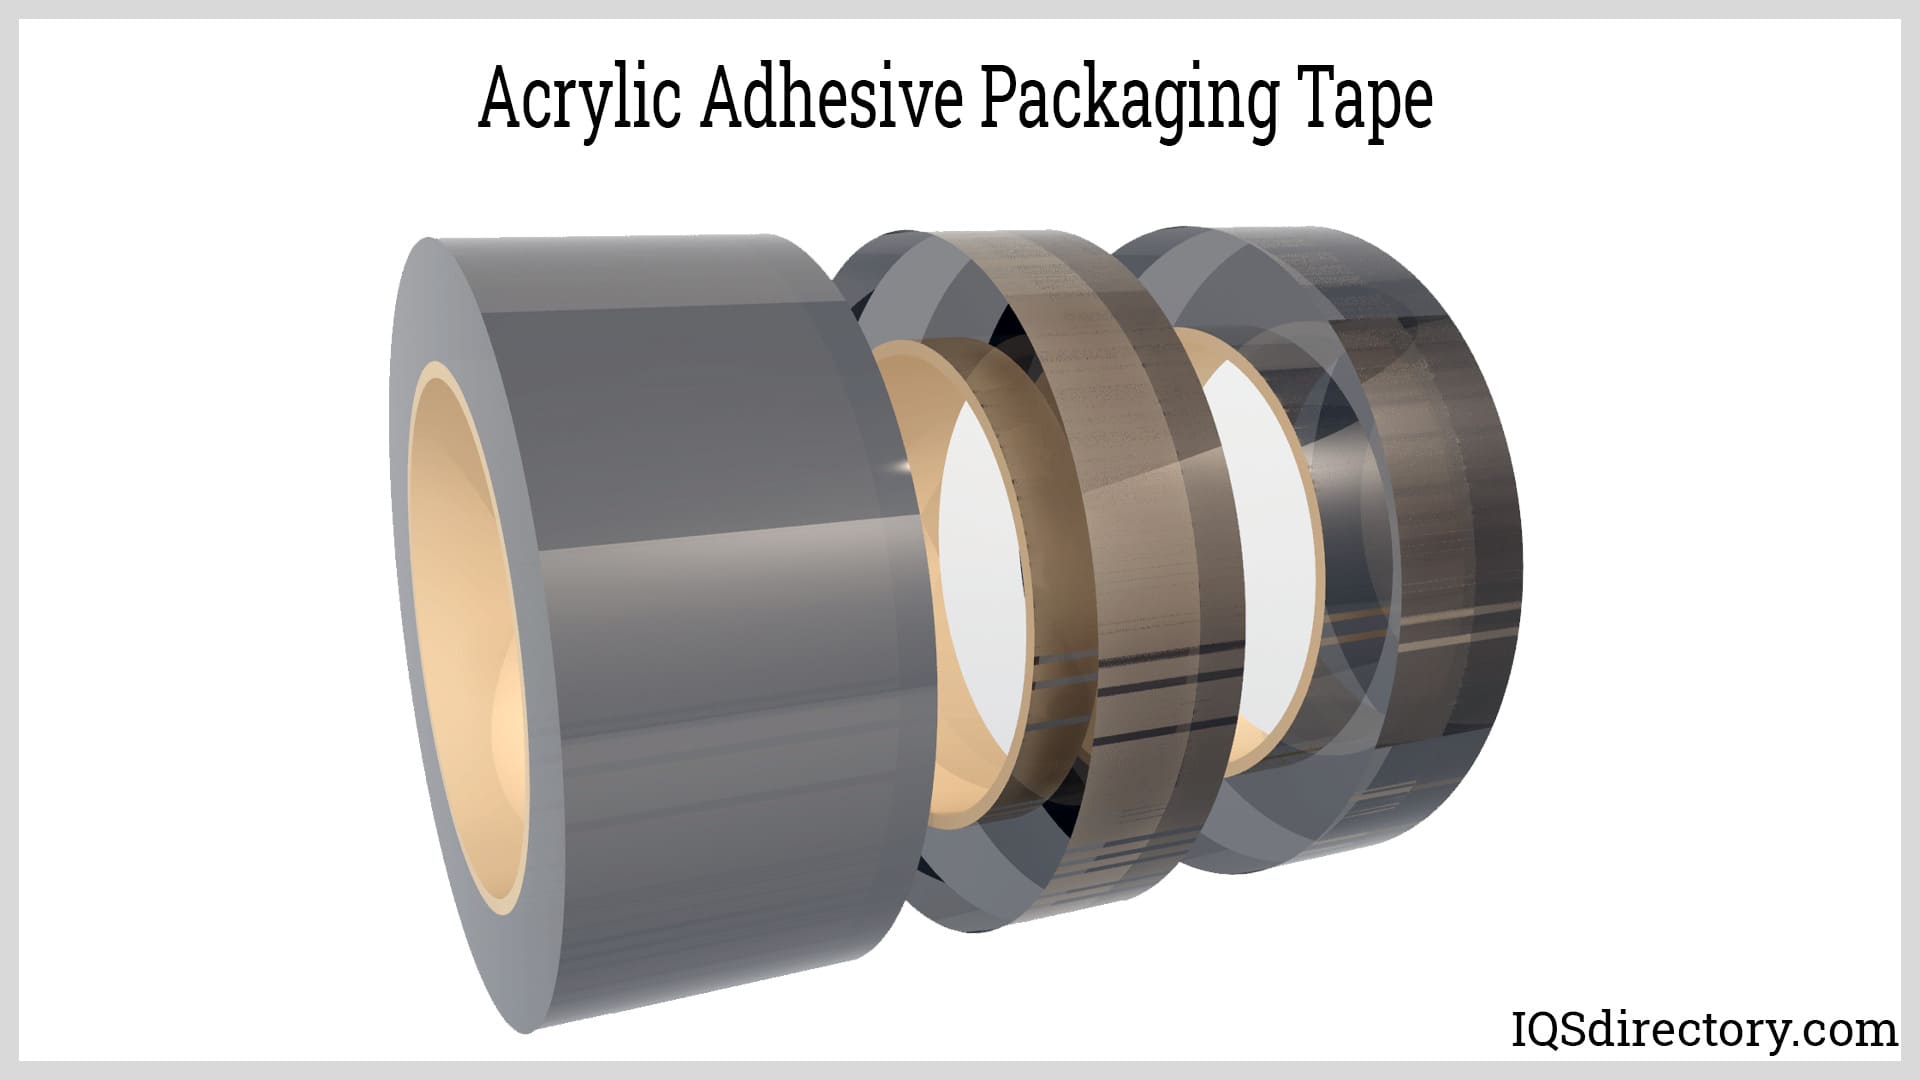 Acrylic Adhesive Packaging Tape